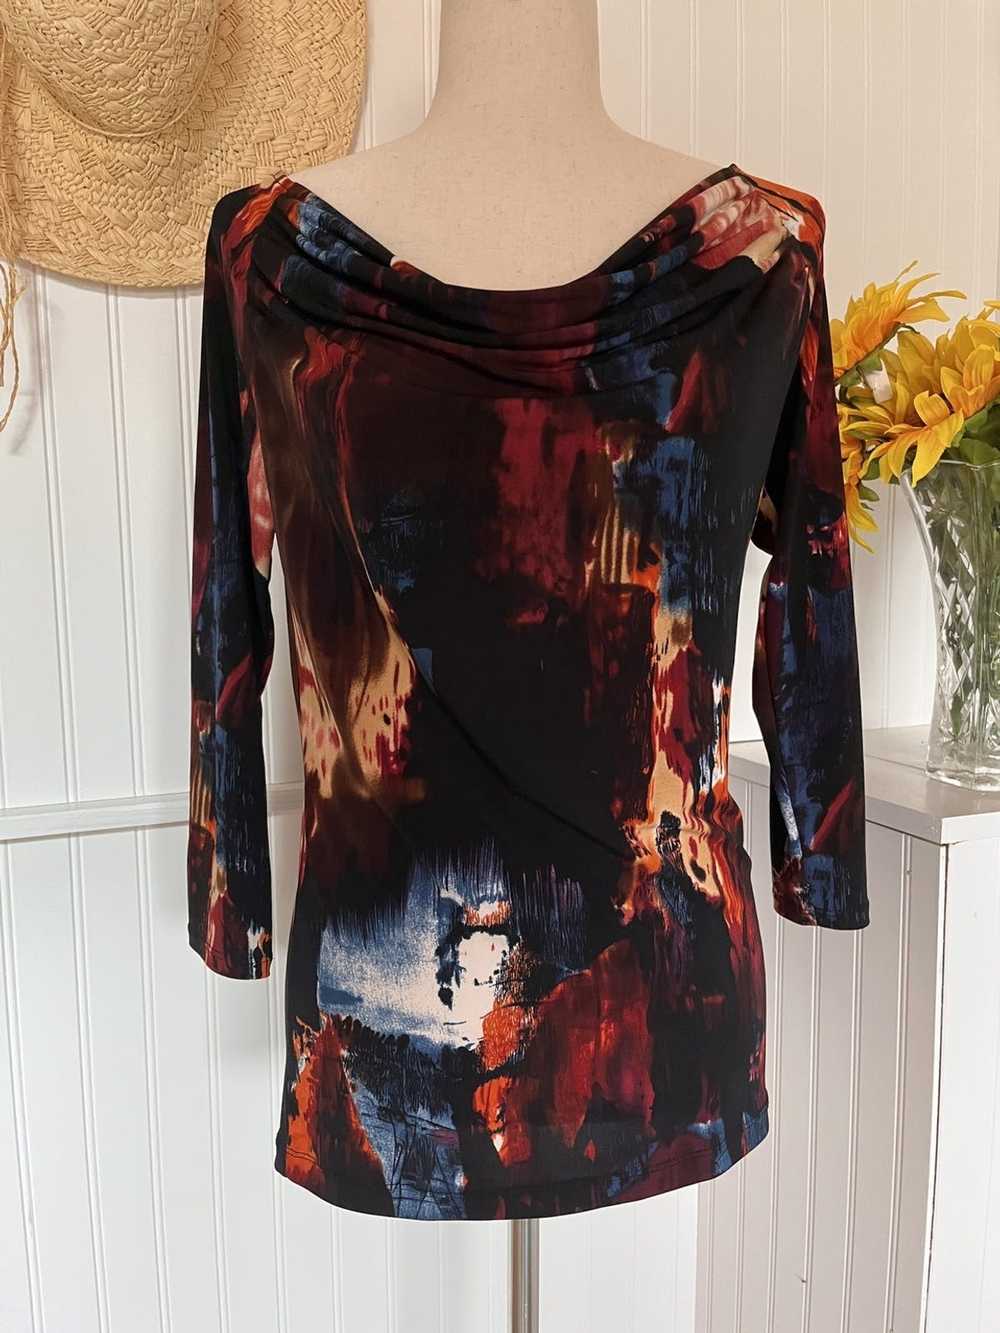 Other Grace Elements Multicolored Blouse Size Sma… - image 4